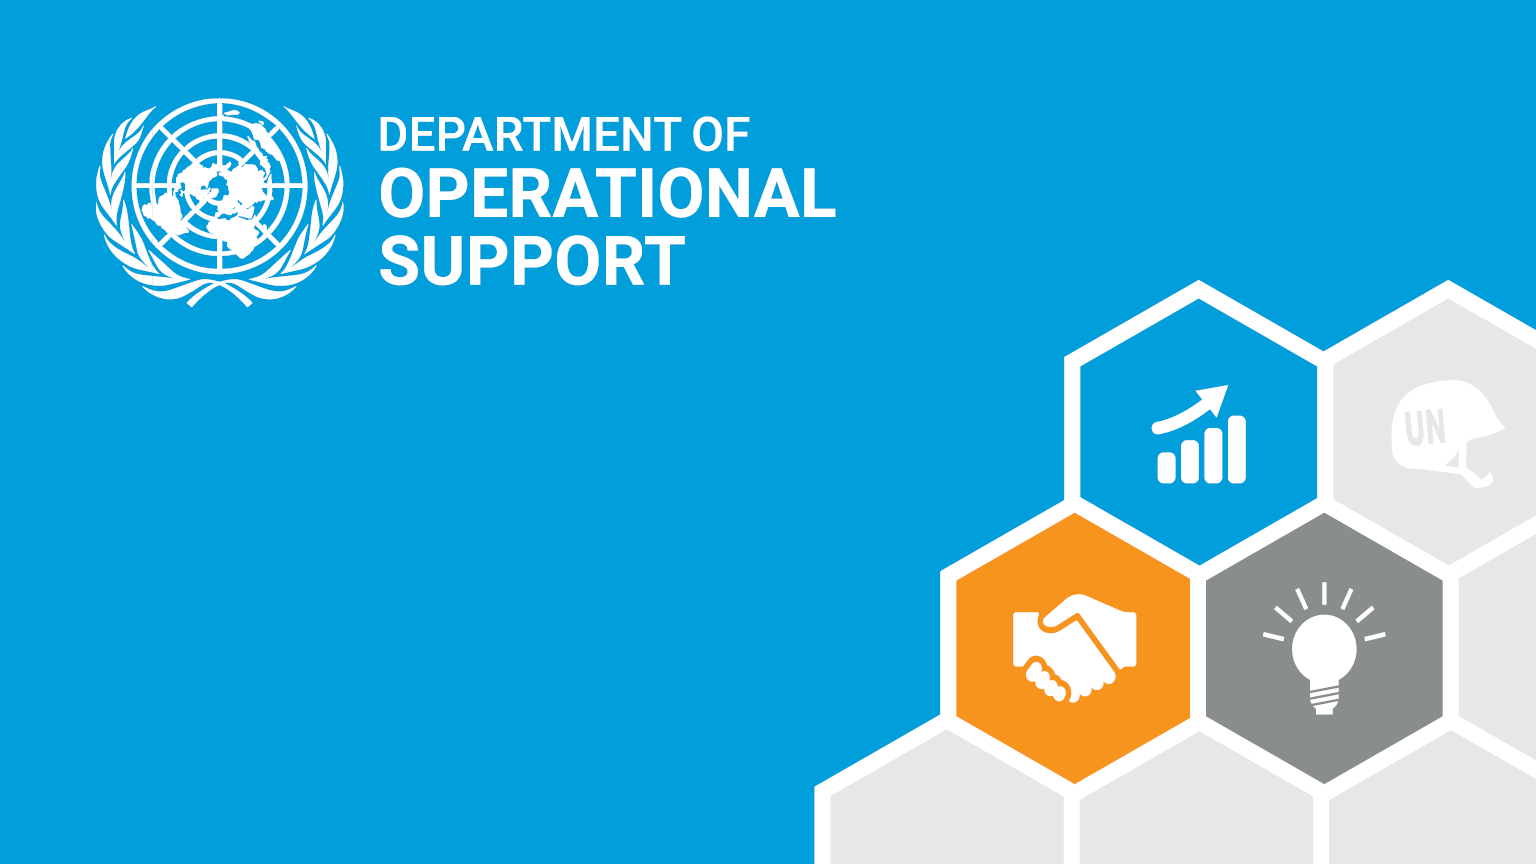 Background | DEPARTMENT OF OPERATIONAL SUPPORT